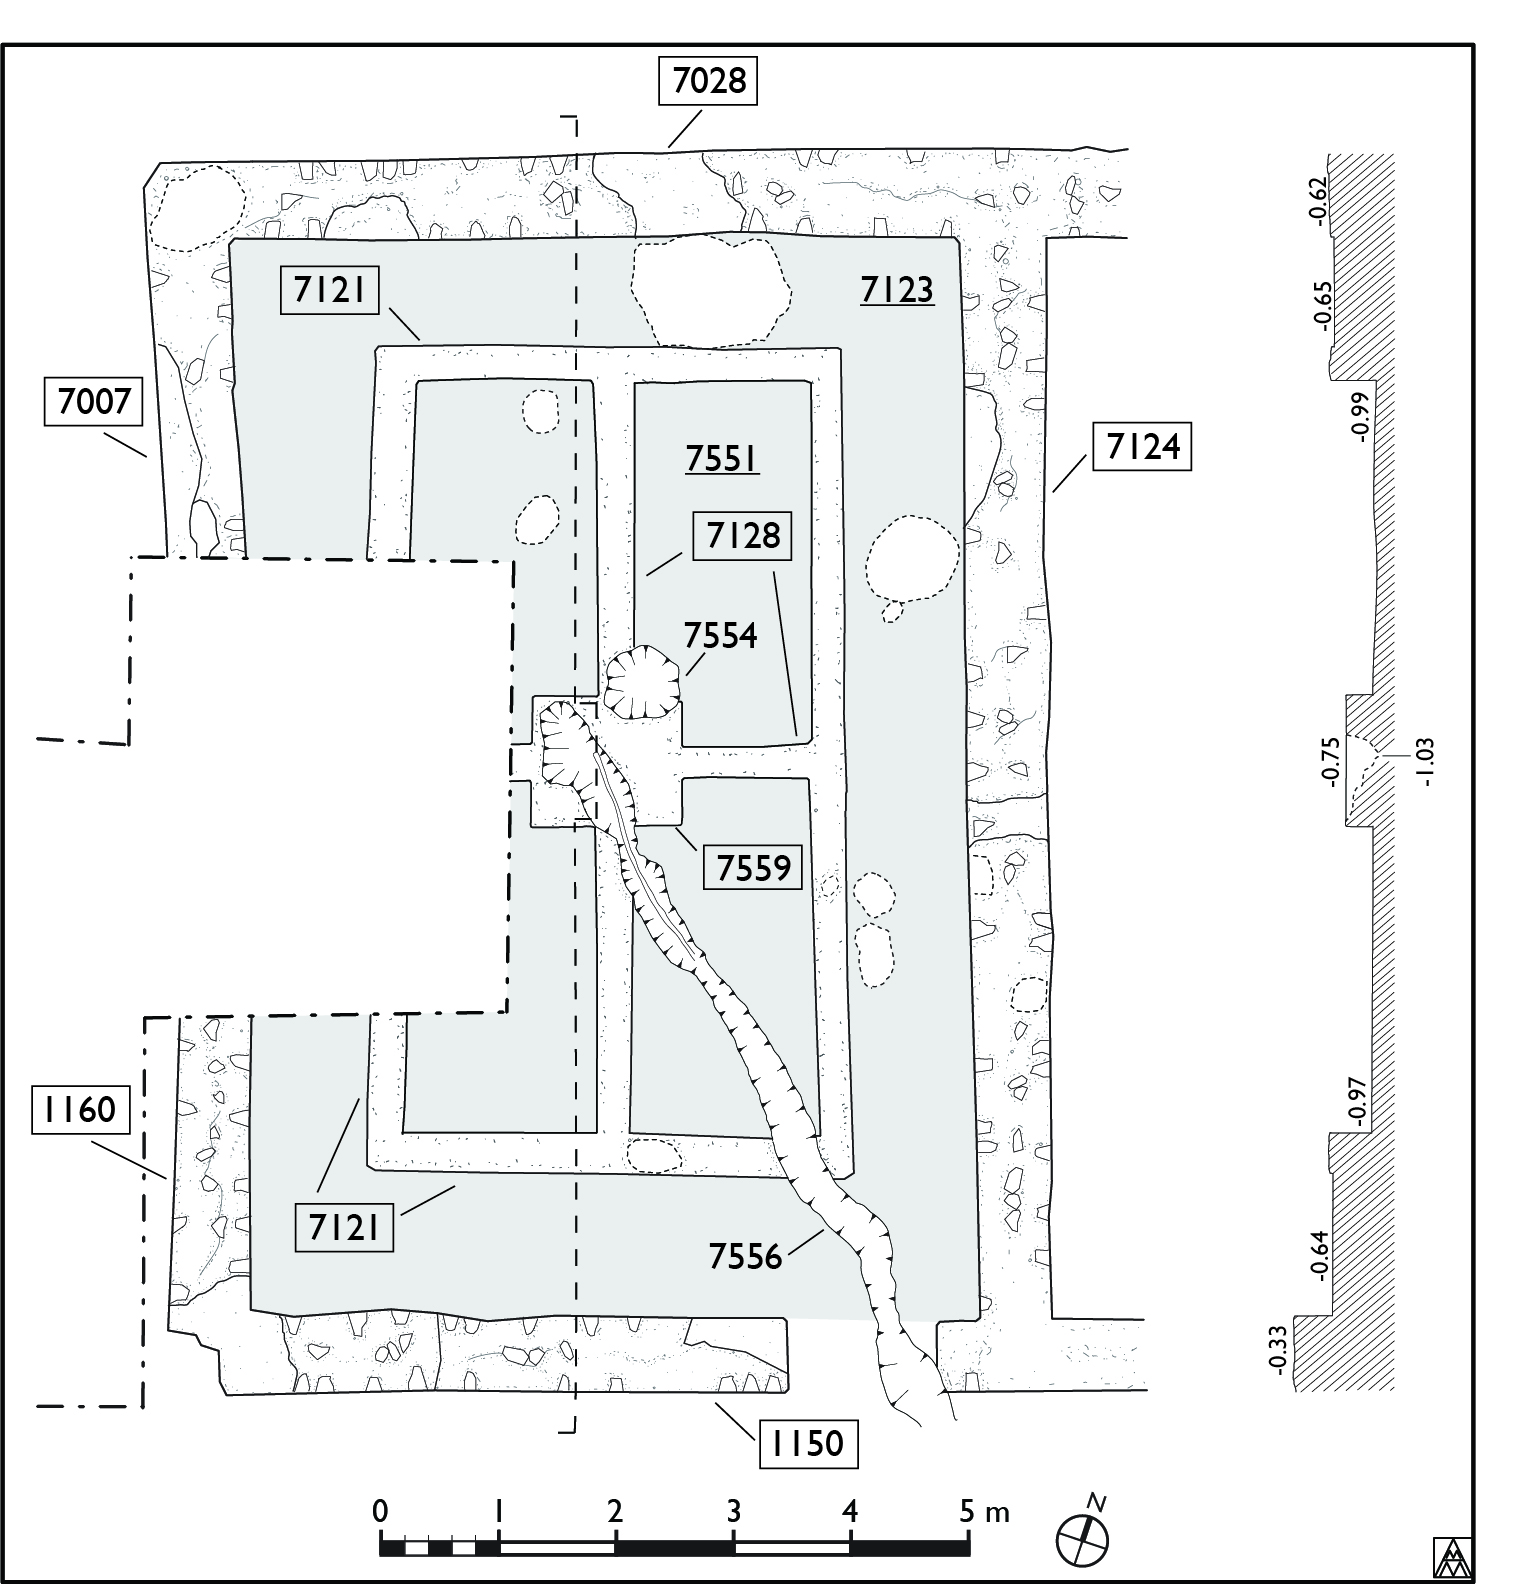 Figure 22. Plan and section of Room 12 (Margaret Andrews).